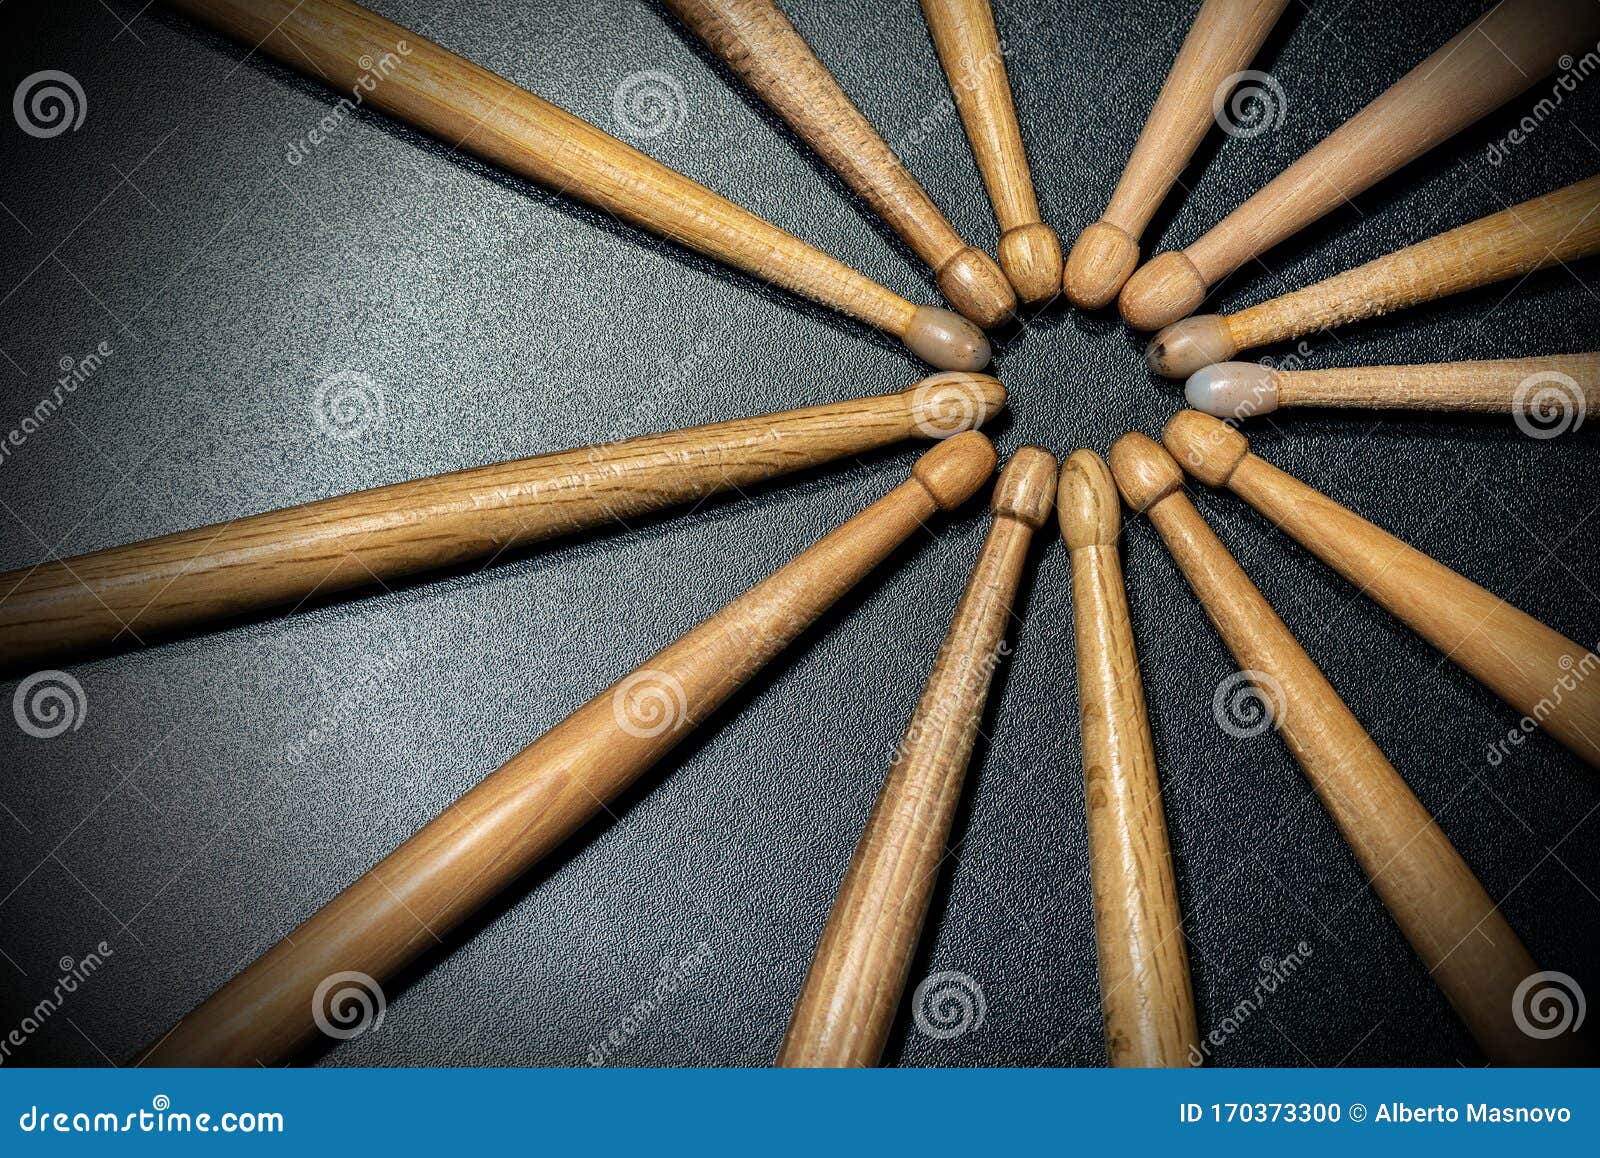 wooden used drumsticks on a dark background - percussion instrument 1